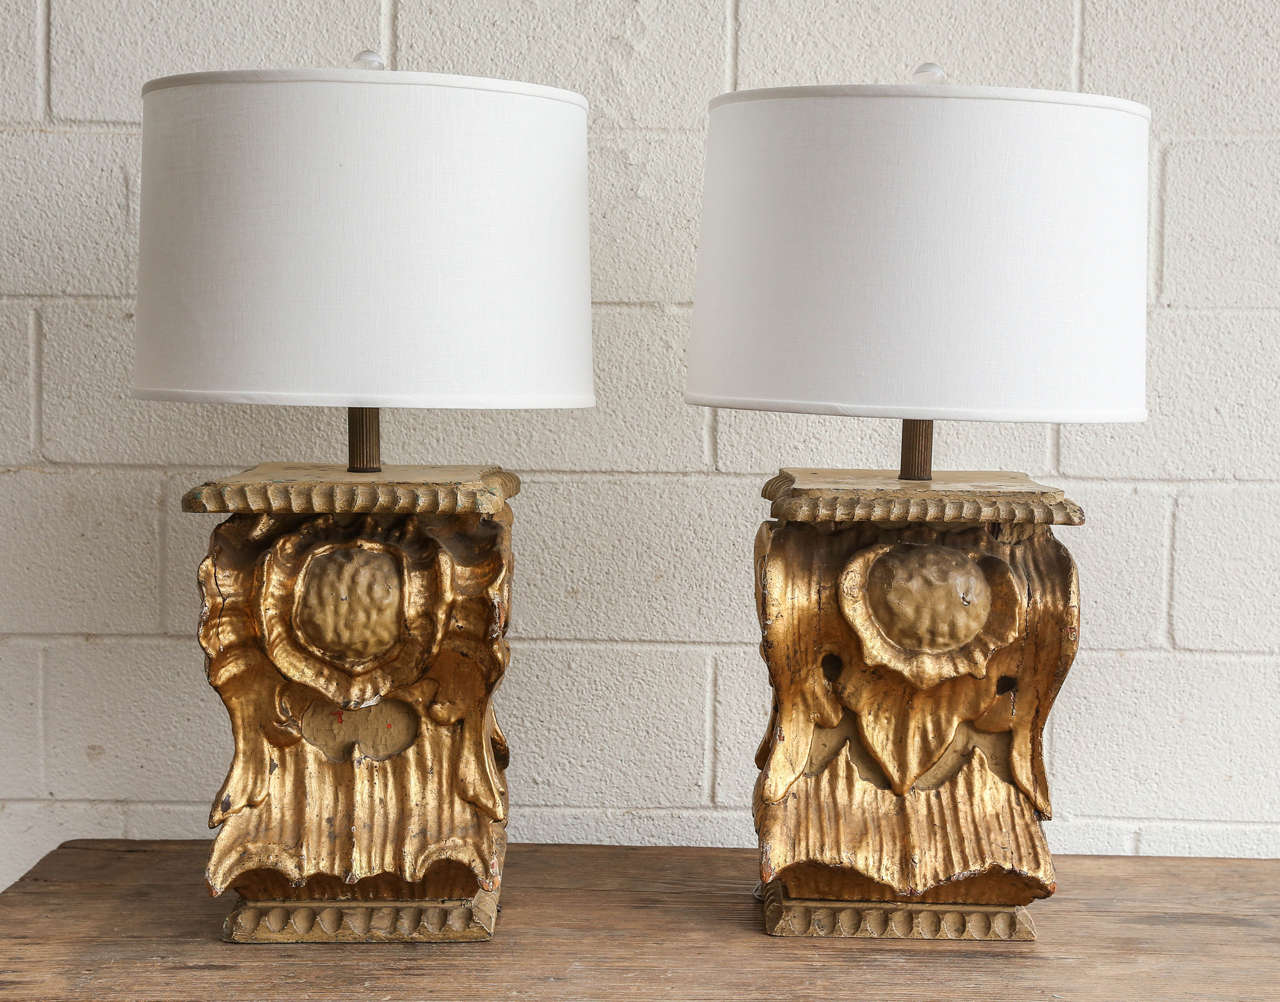 Beautiful gold gilt lamps made with 19th century altar elements from an Italian cathedral.